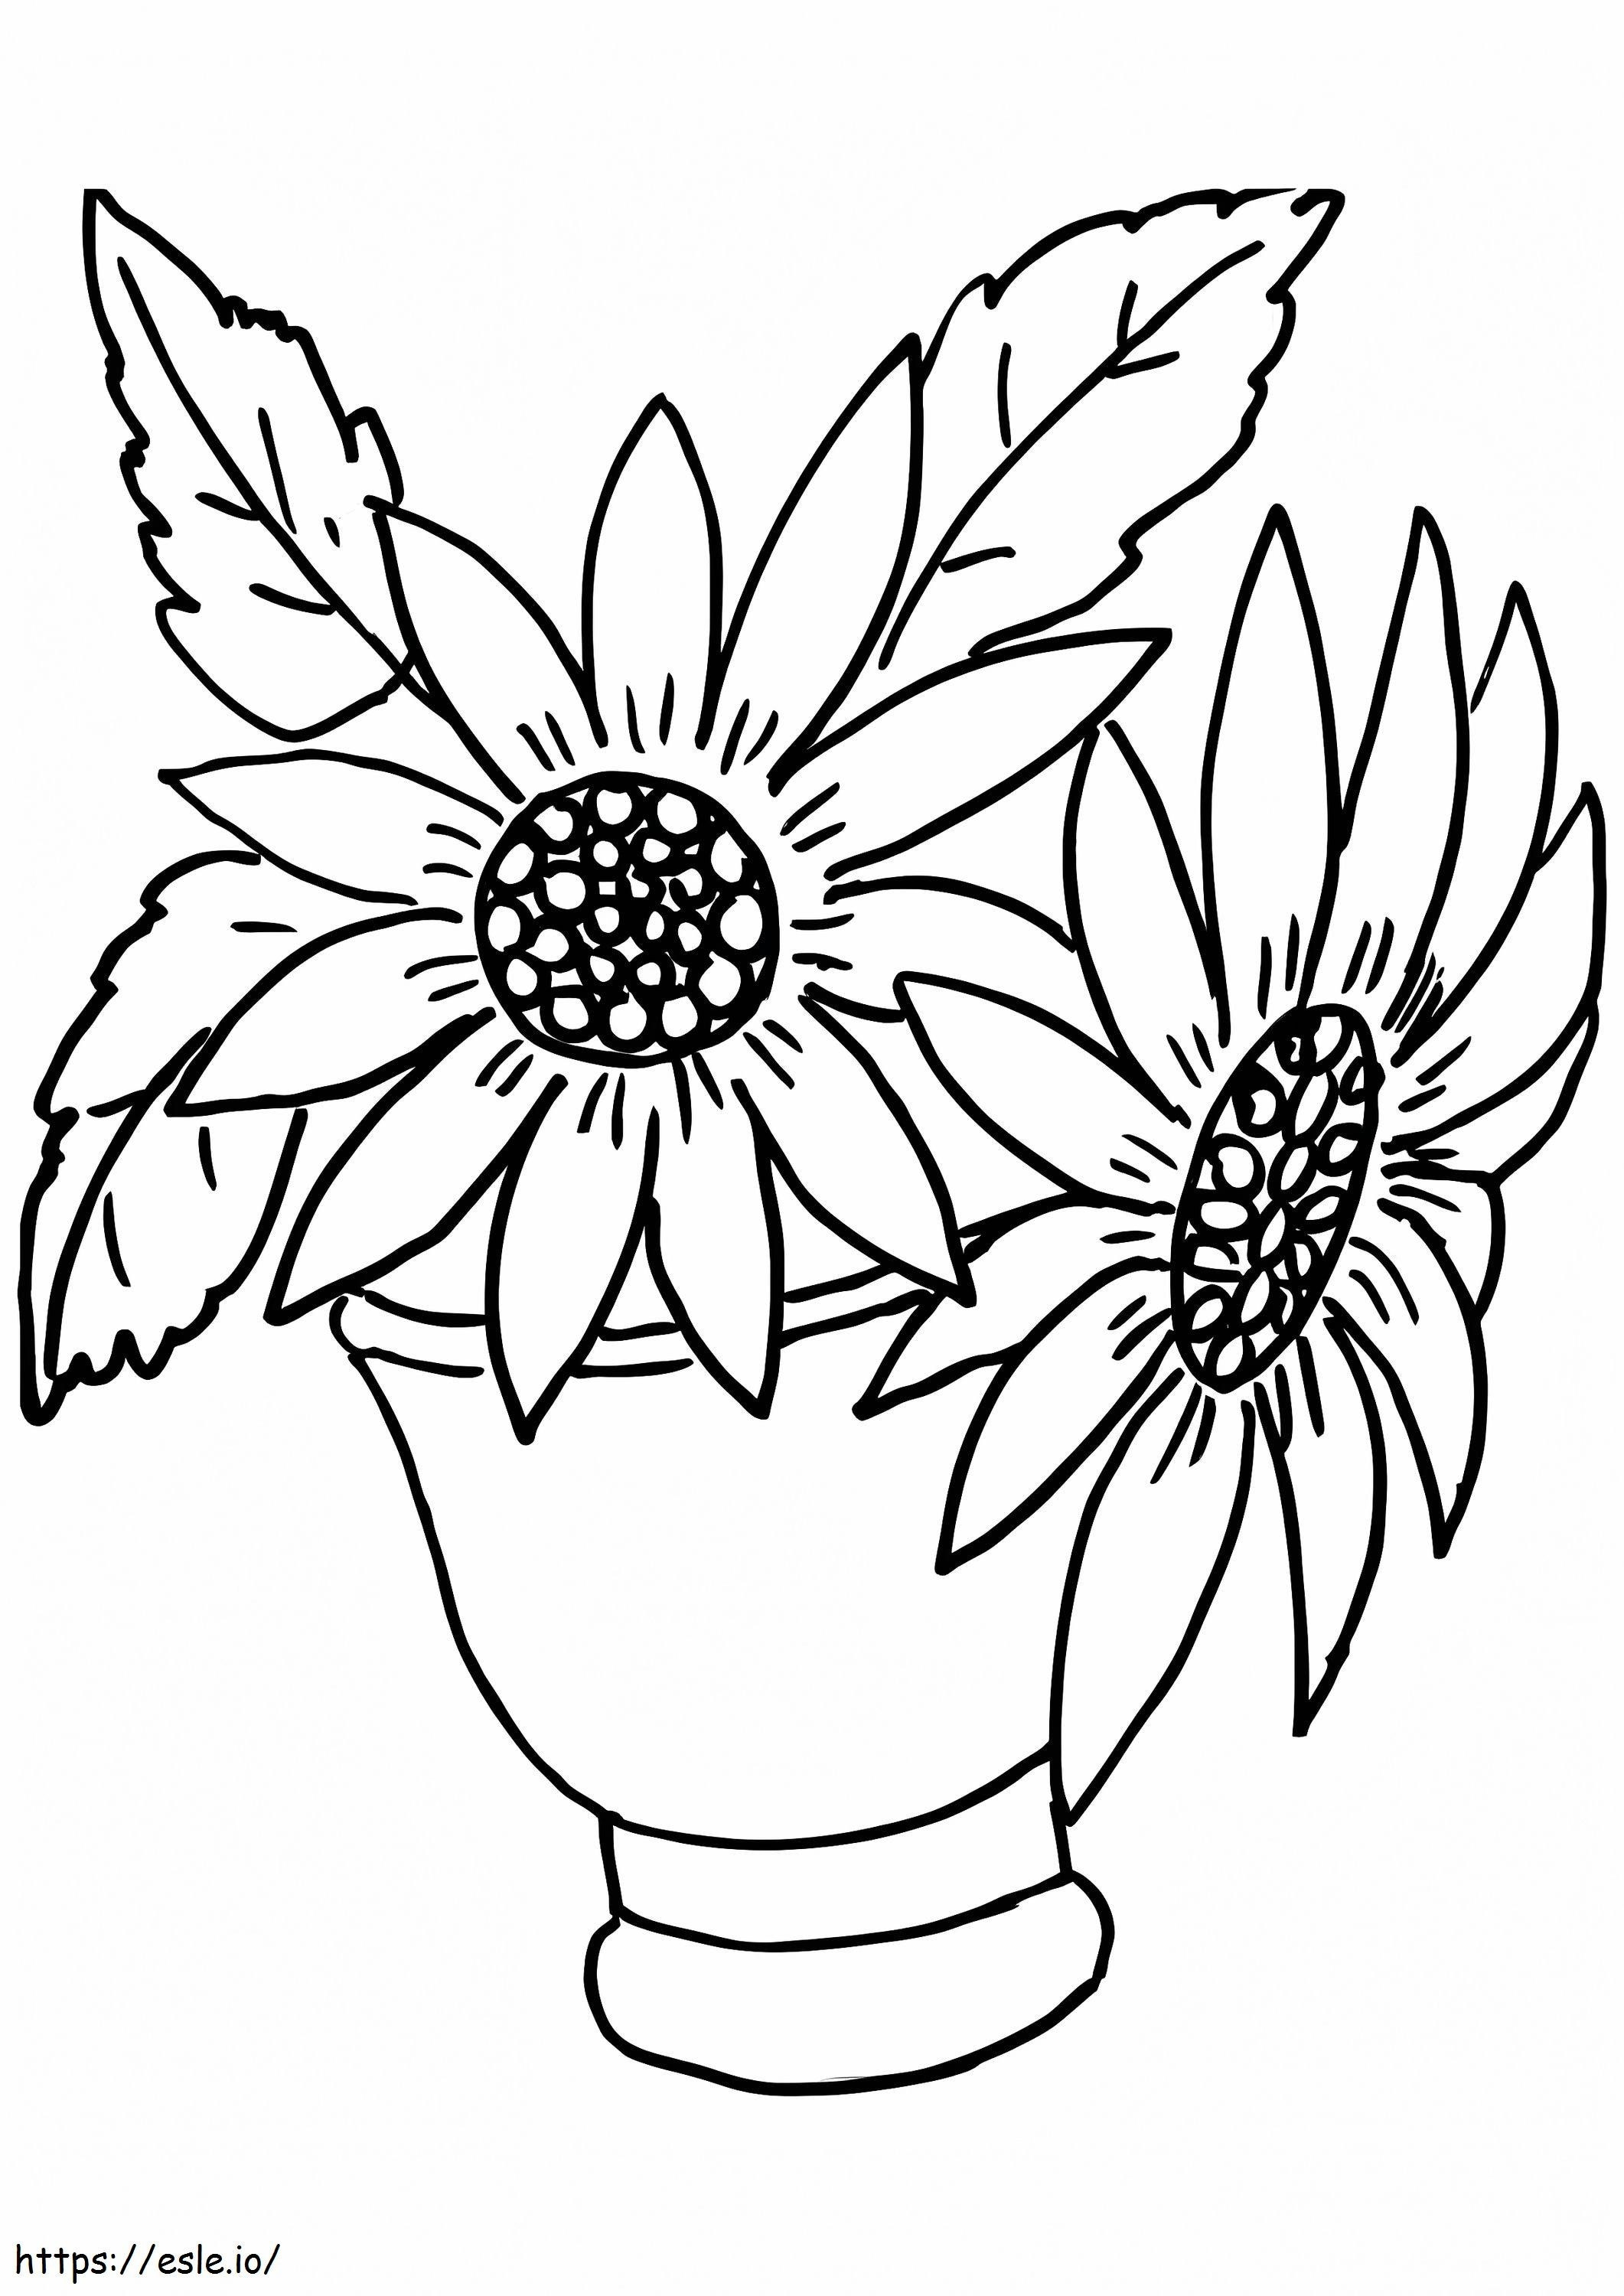 Sunflowers Vase coloring page